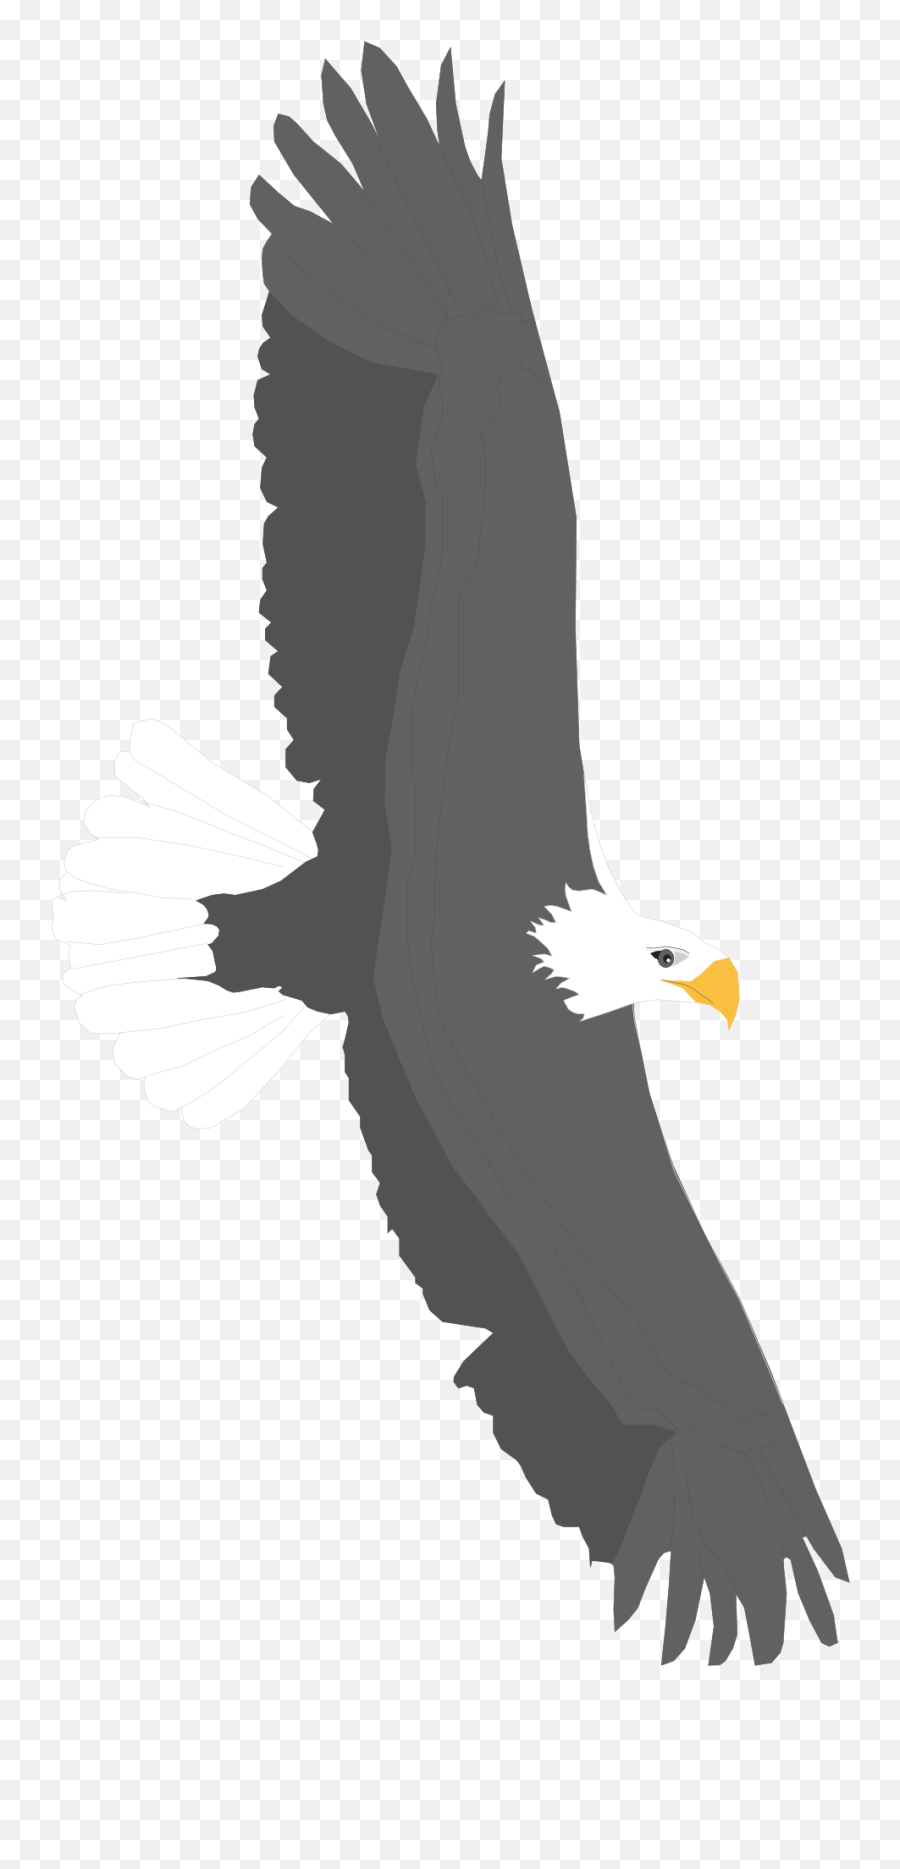 White And Black Eagle Is Flying Clipart - Eagle Emoji,Eagle Clipart Black And White